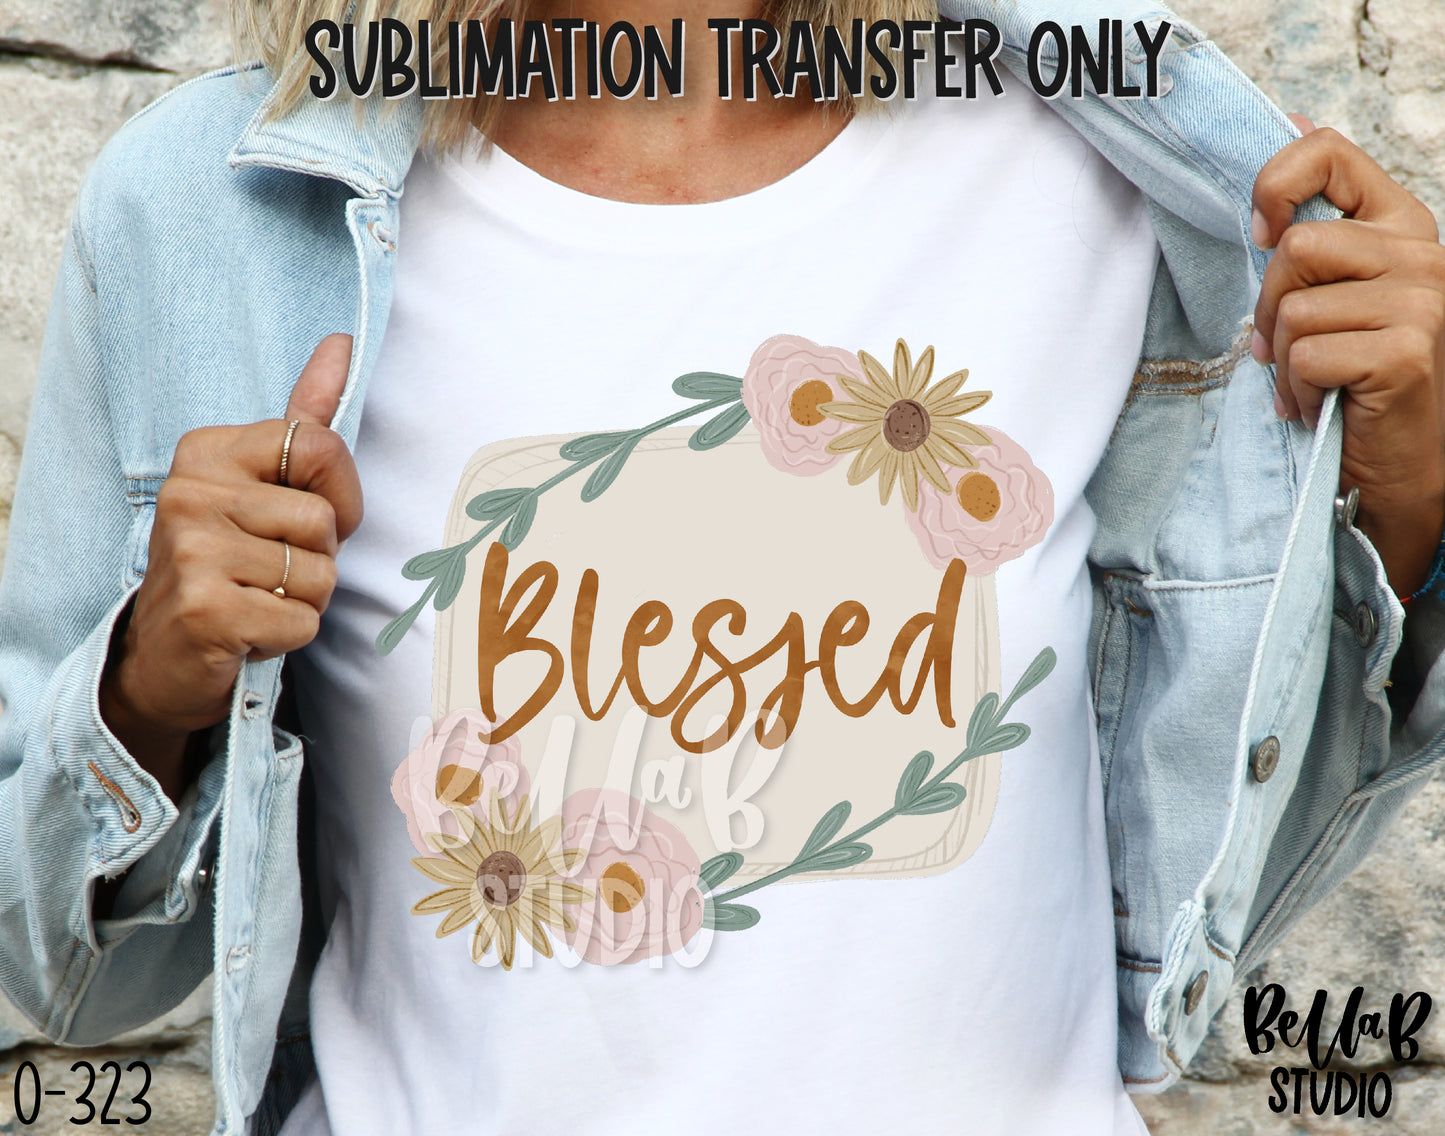 Floral Blessed Sublimation Transfer, Ready To Press - O323